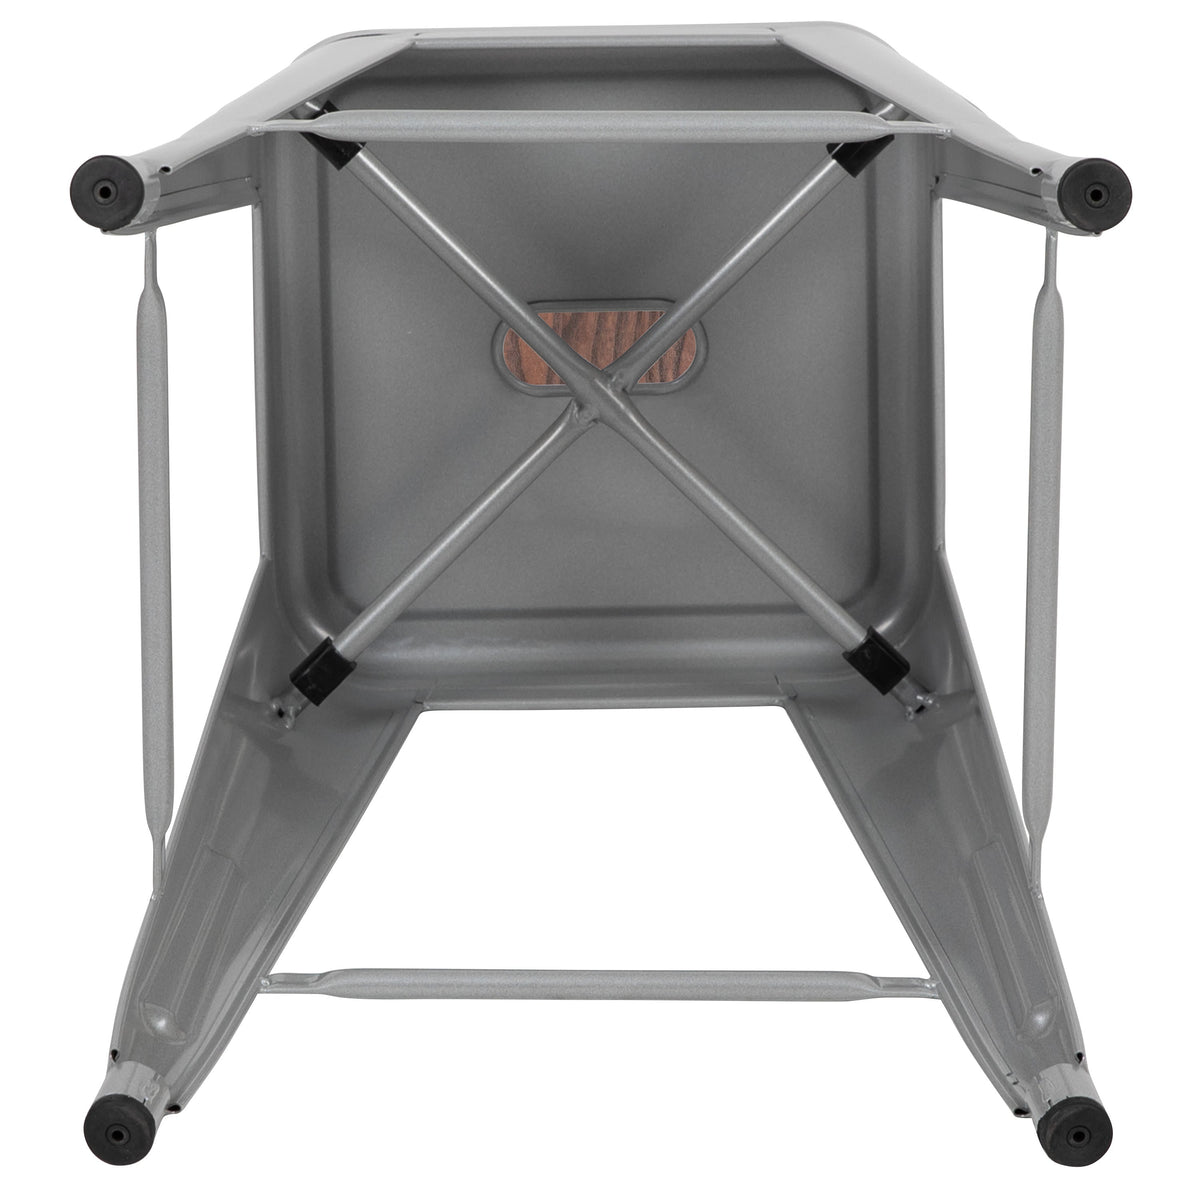 Silver |#| 4 Pack 30inch High Metal Indoor Bar Stool - Stackable Stool, Silver